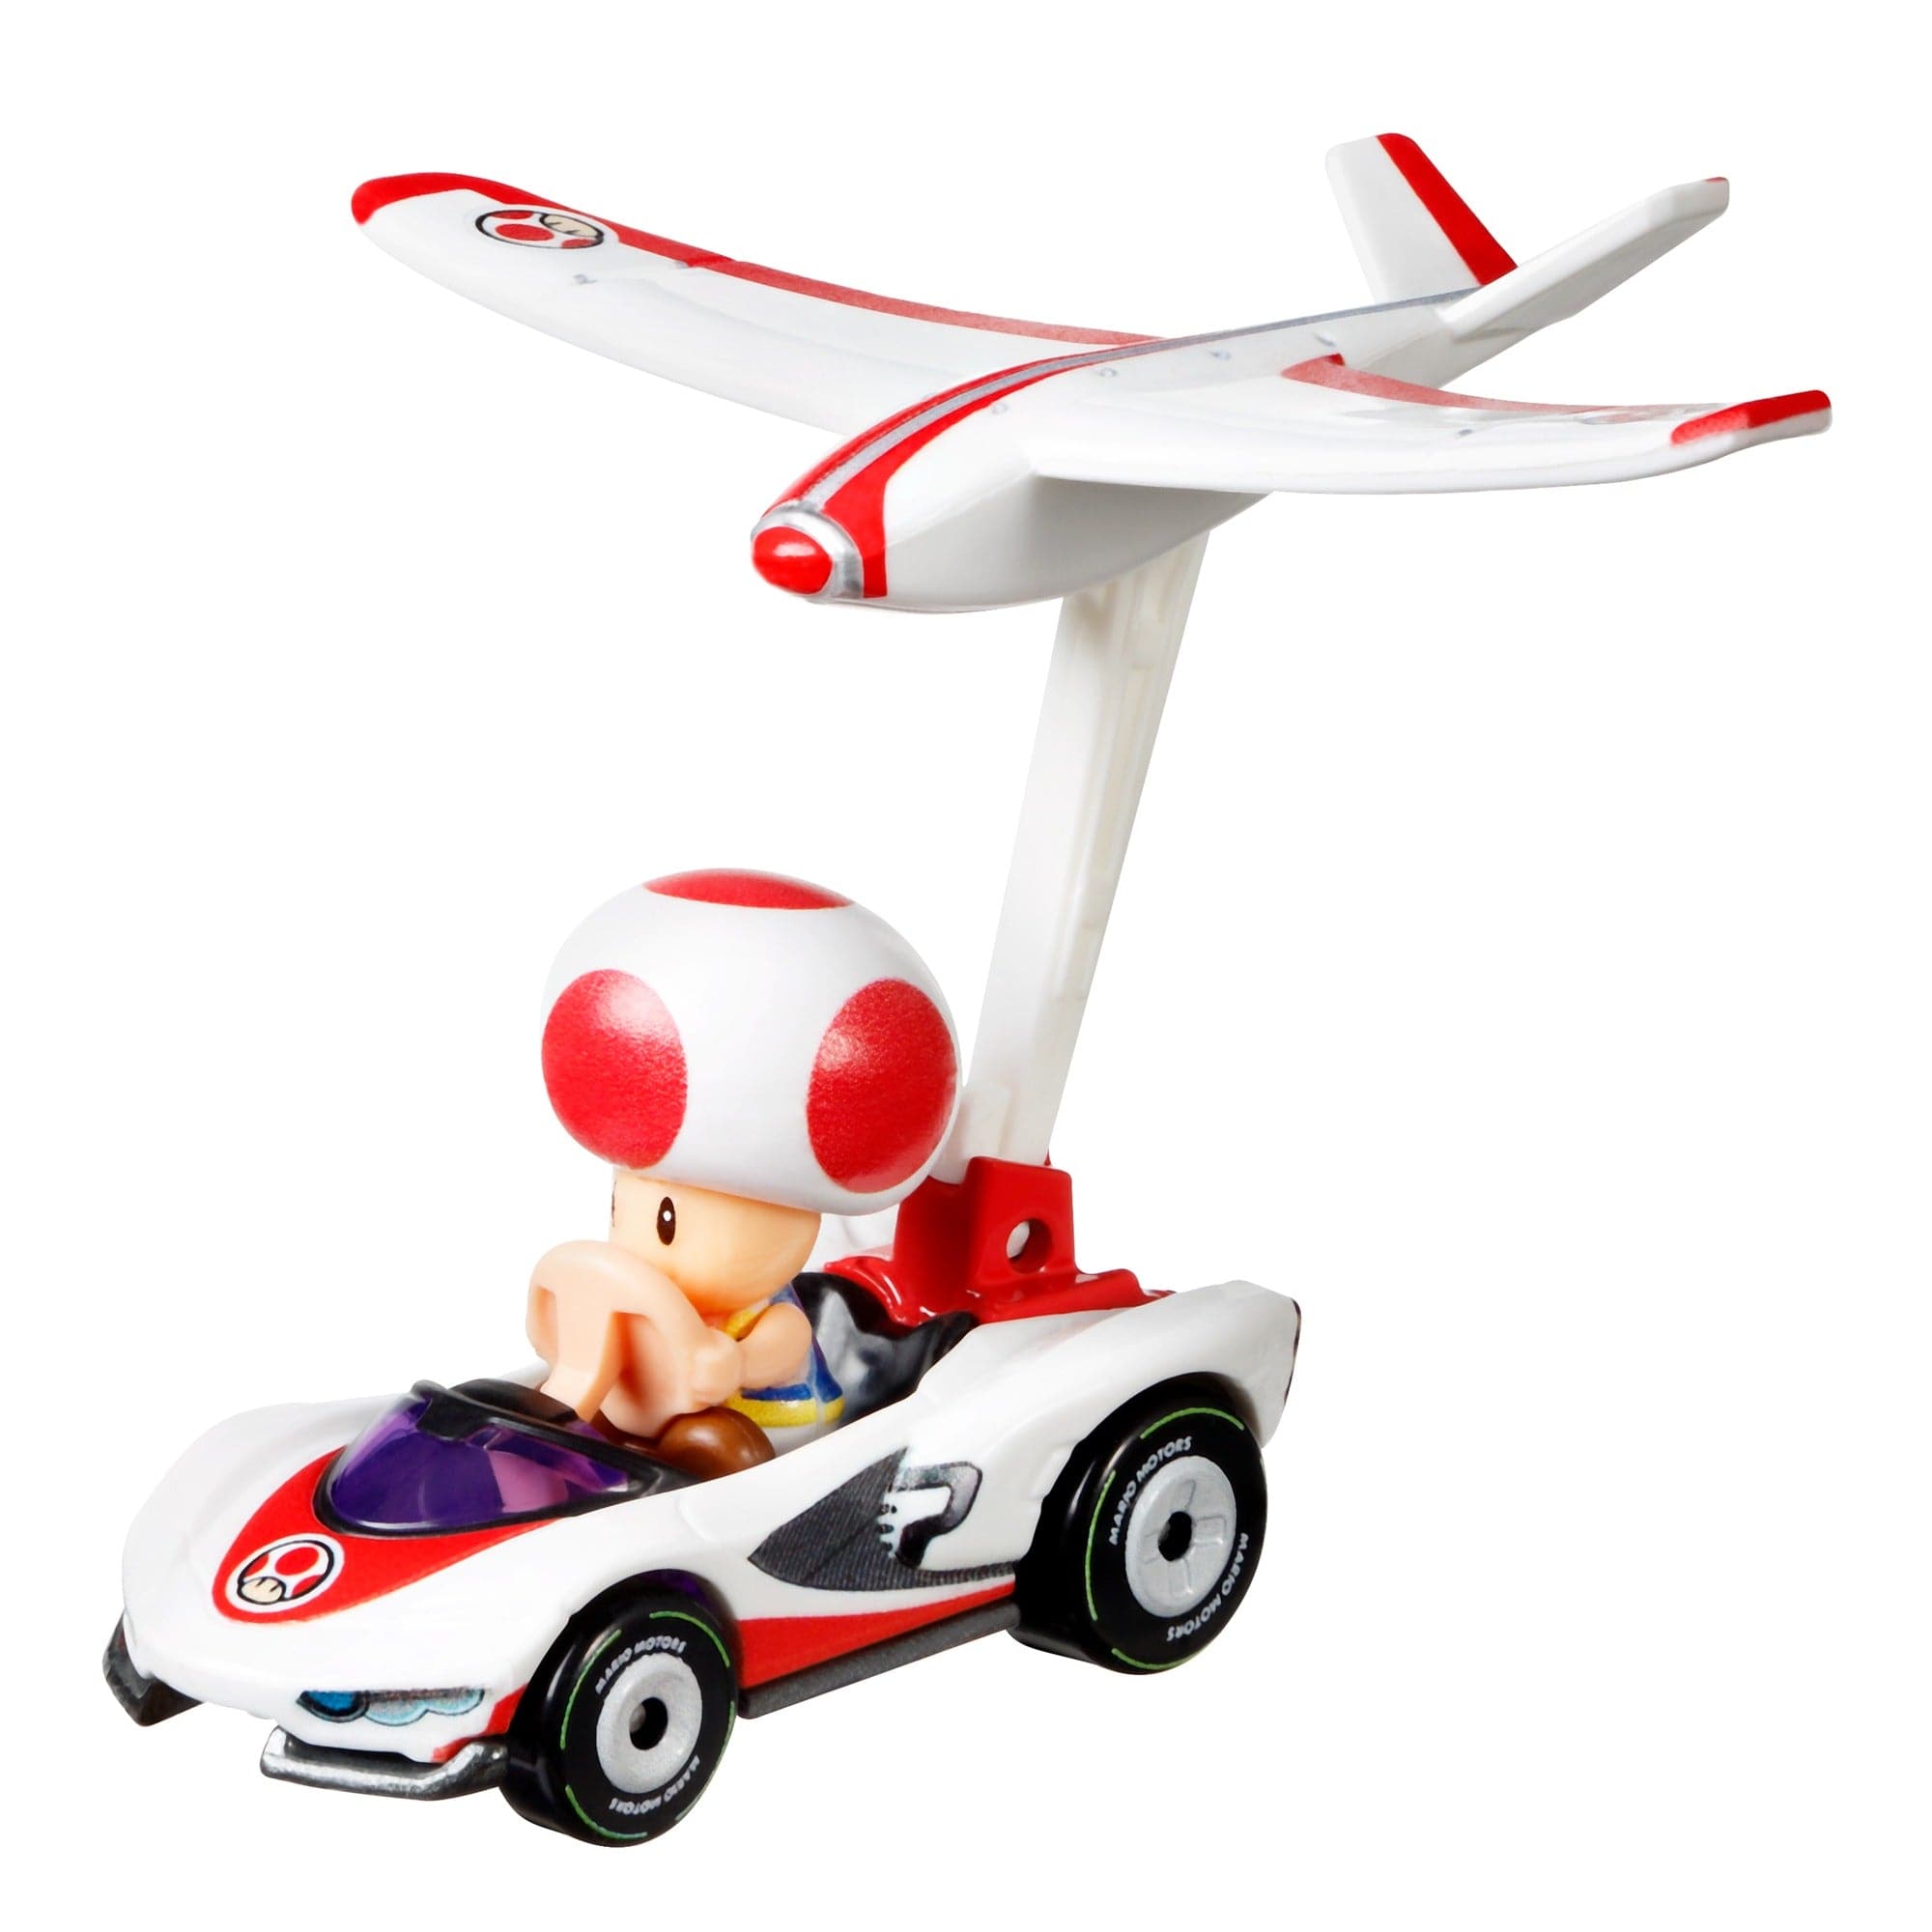 Mattel-Hot Wheels Mario Kart Gliders-GVD34-Toad P-Wing + Plane Glider-Legacy Toys